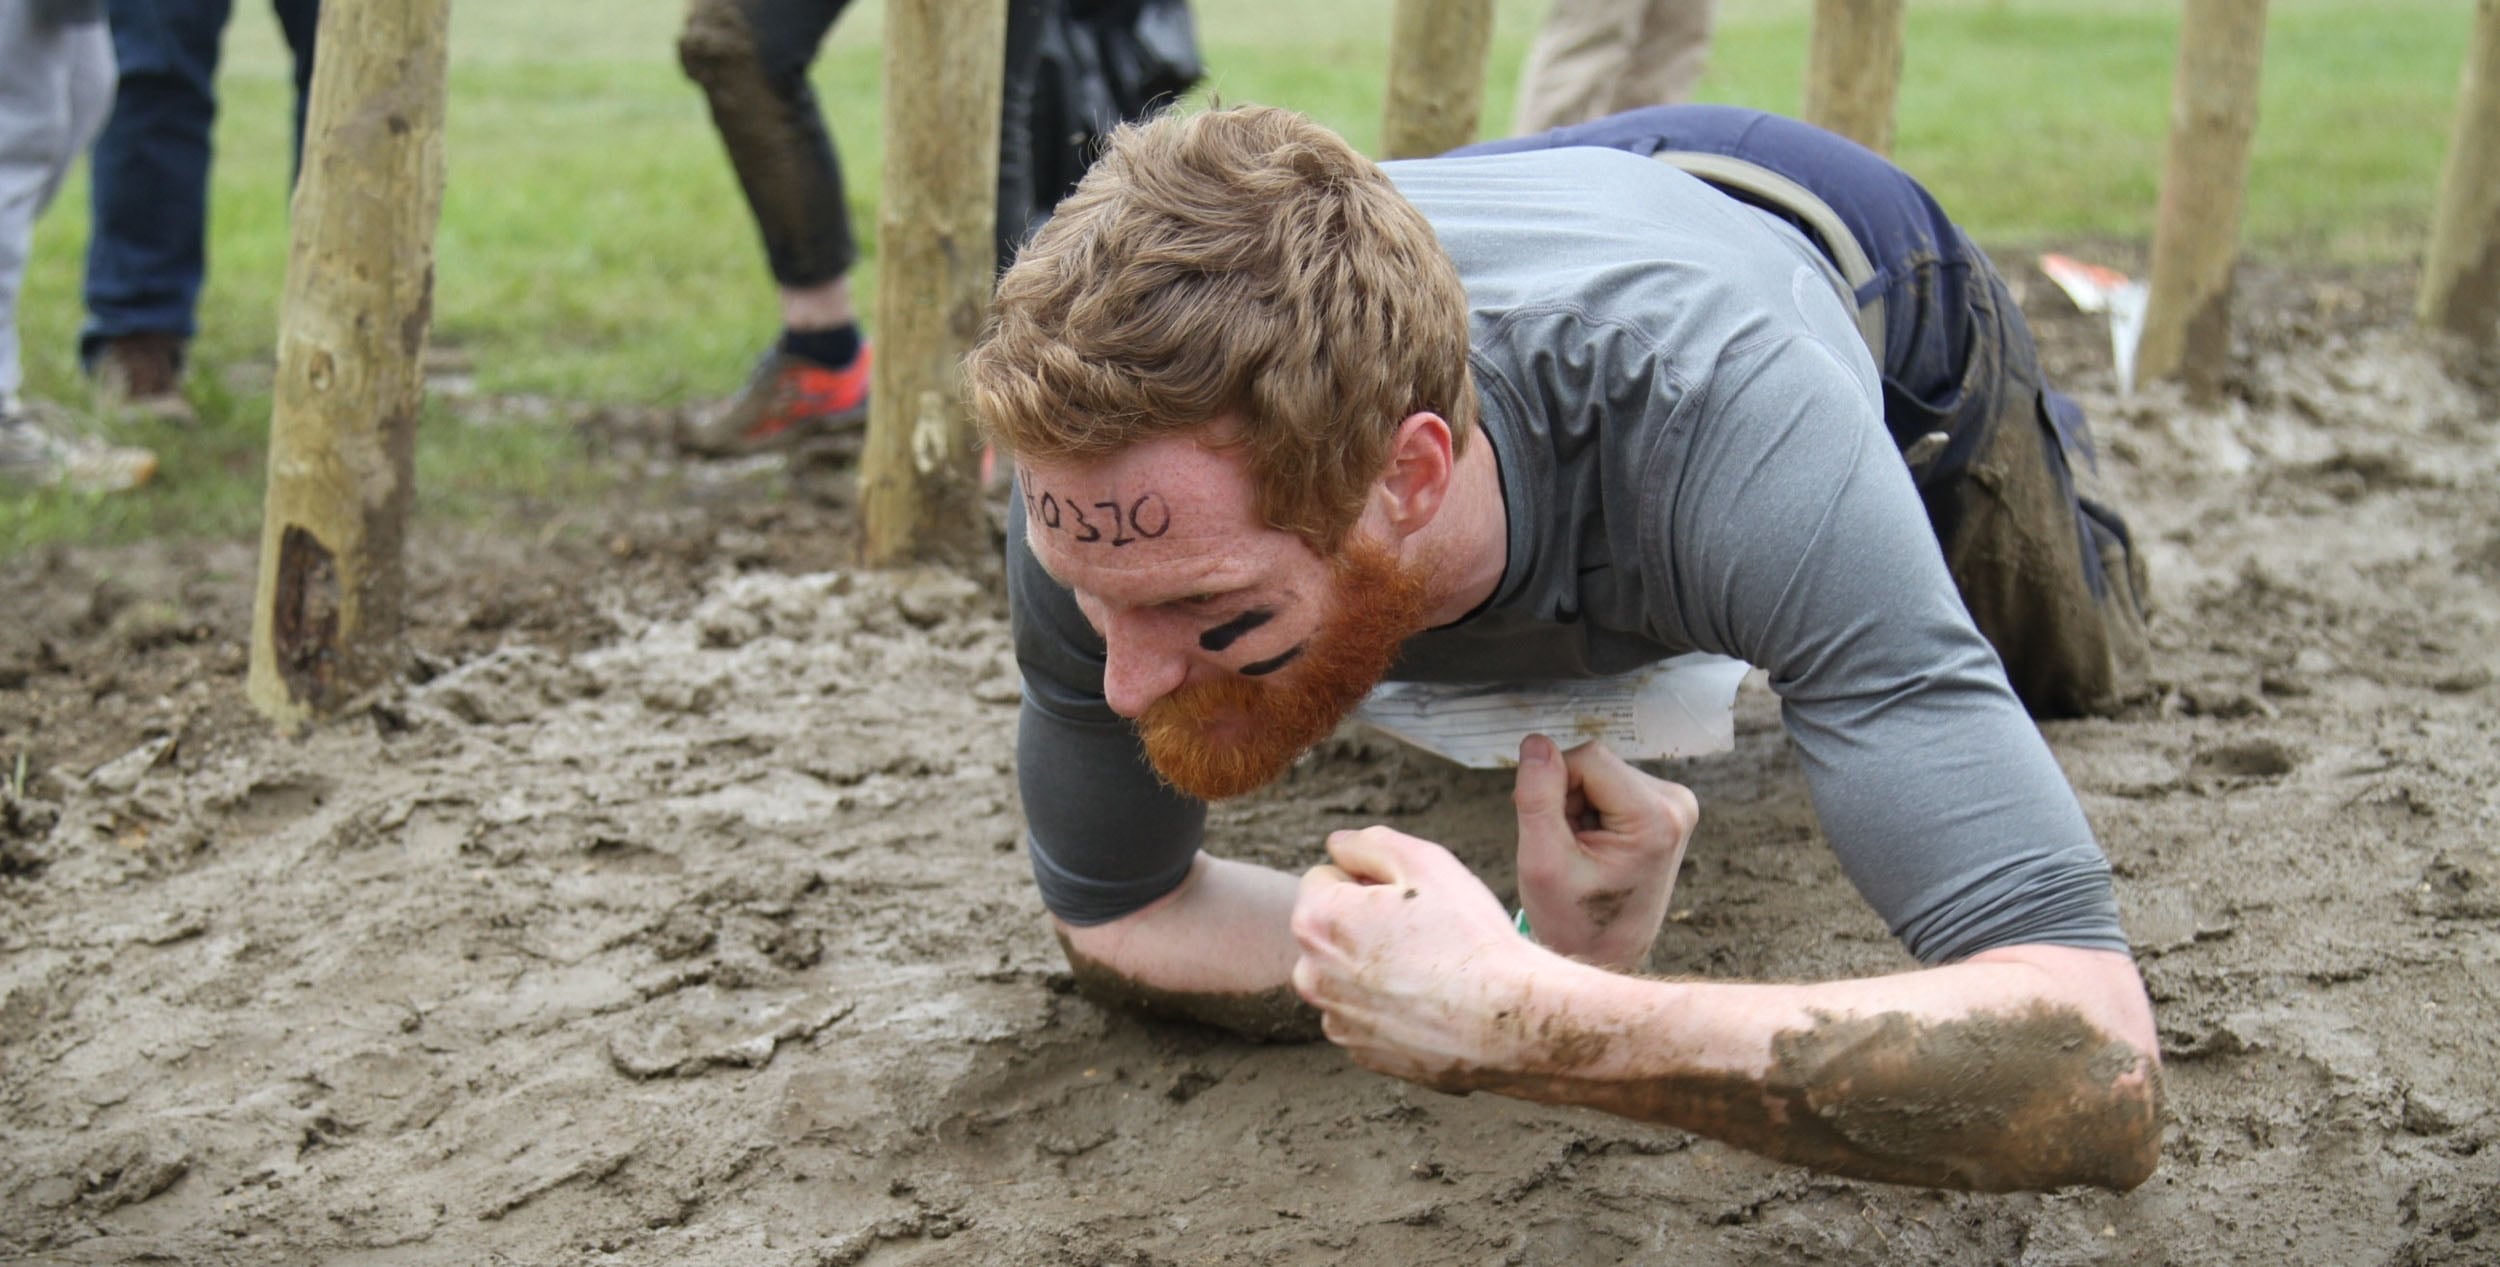 Ed braves the mud for the foodbank - Bournemouth Foodbank